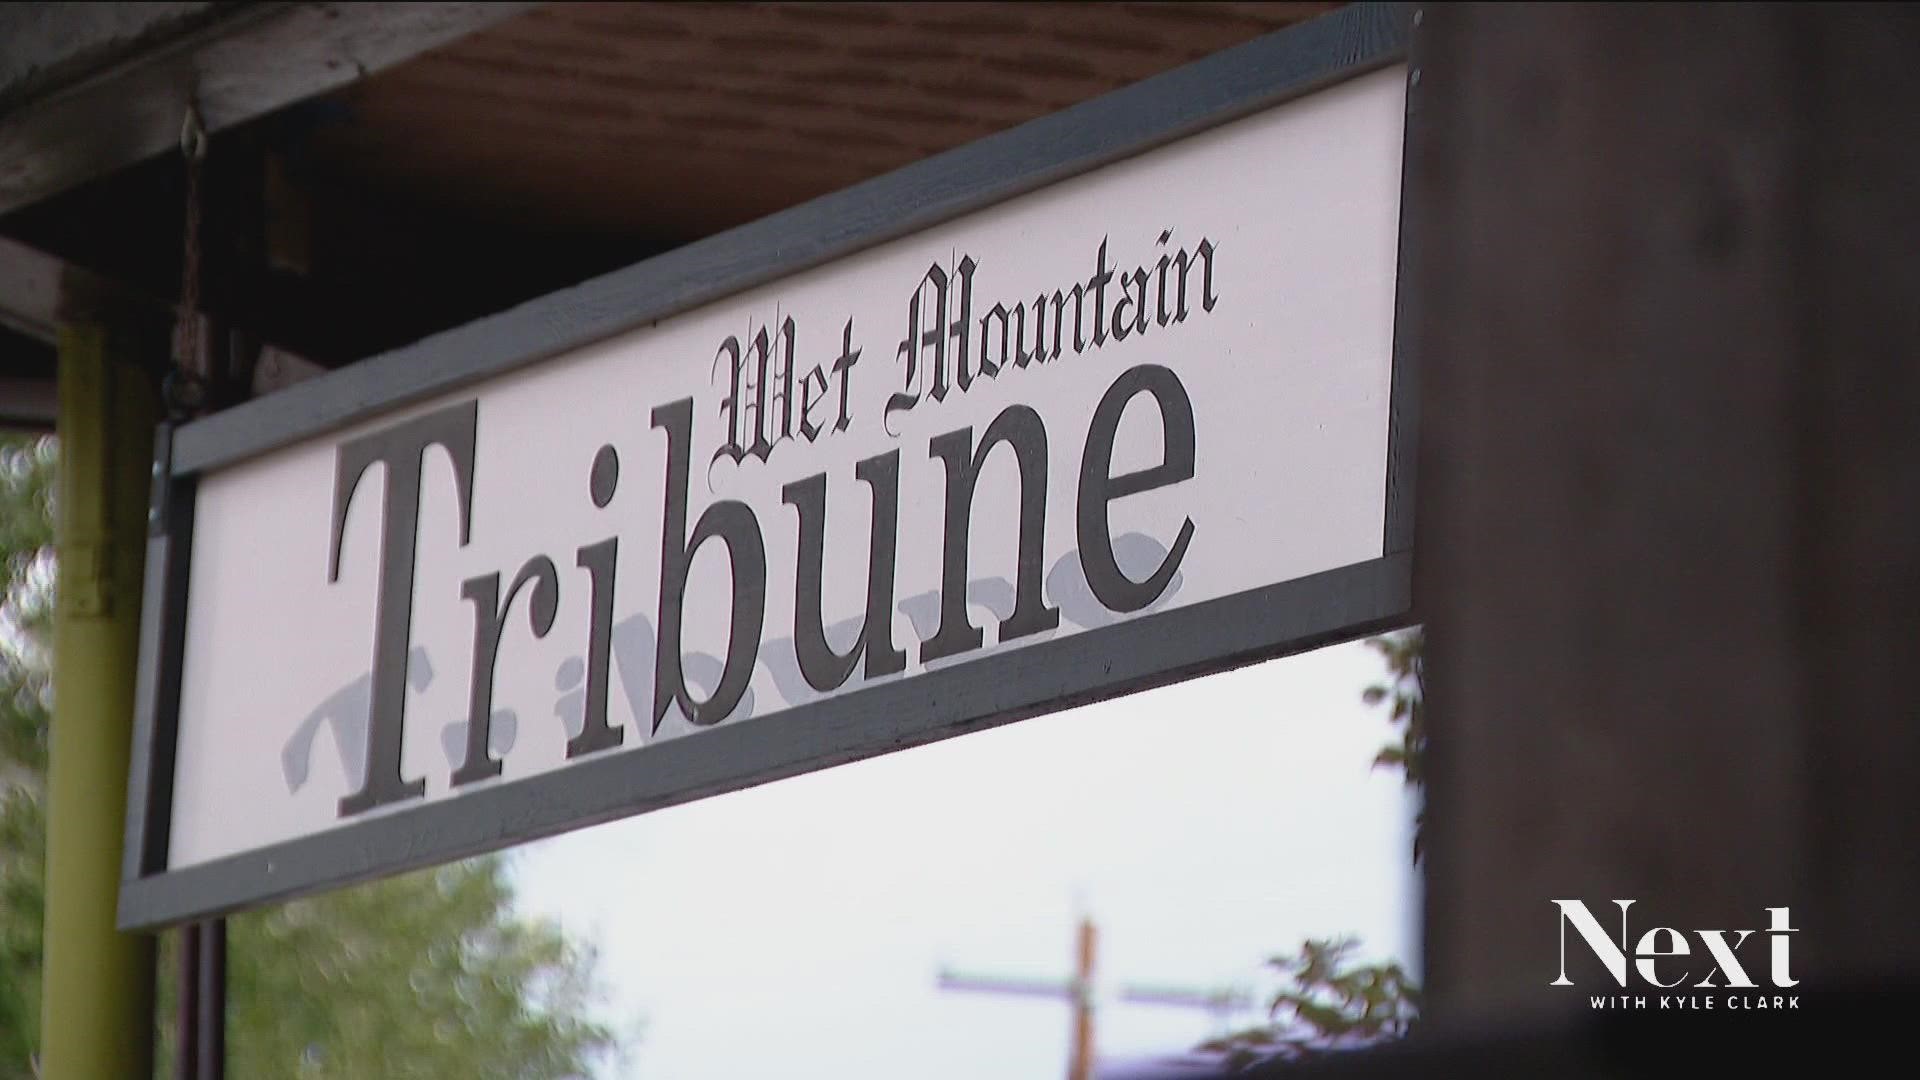 The Wet Mountain Tribune, one of two papers in town, was passed over by commissioners for "paper of record" after they took issue with the paper's reporting.